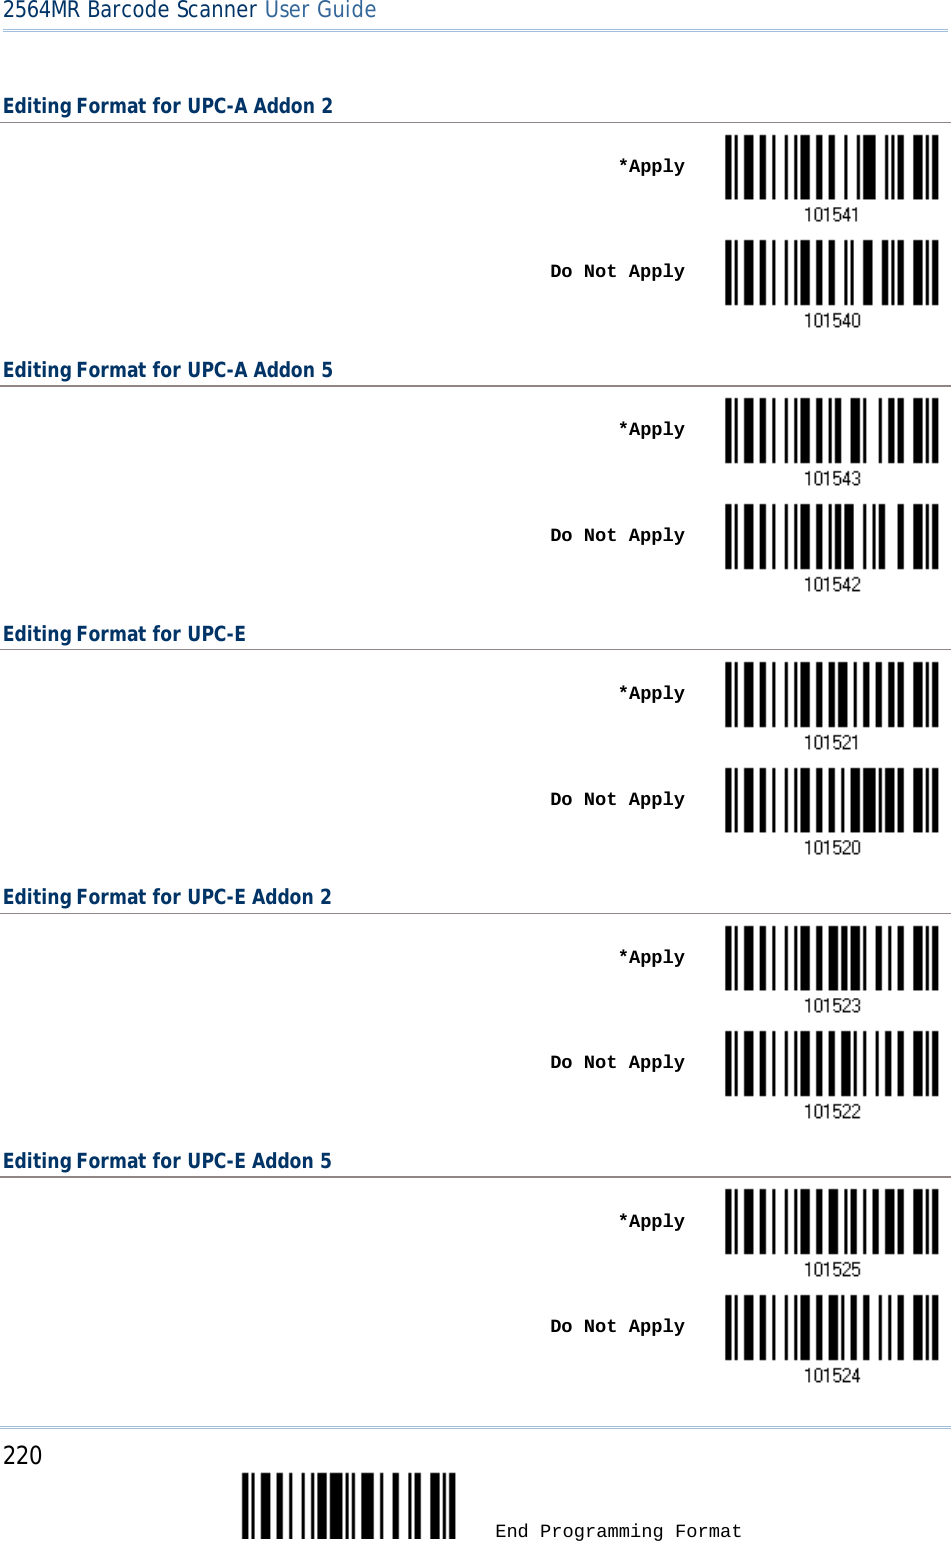 2564MR Barcode Scanner User Guide  Editing Format for UPC-A Addon 2    *Apply     Do Not Apply  Editing Format for UPC-A Addon 5    *Apply     Do Not Apply  Editing Format for UPC-E    *Apply     Do Not Apply  Editing Format for UPC-E Addon 2    *Apply     Do Not Apply  Editing Format for UPC-E Addon 5    *Apply     Do Not Apply  220  End Programming Format 